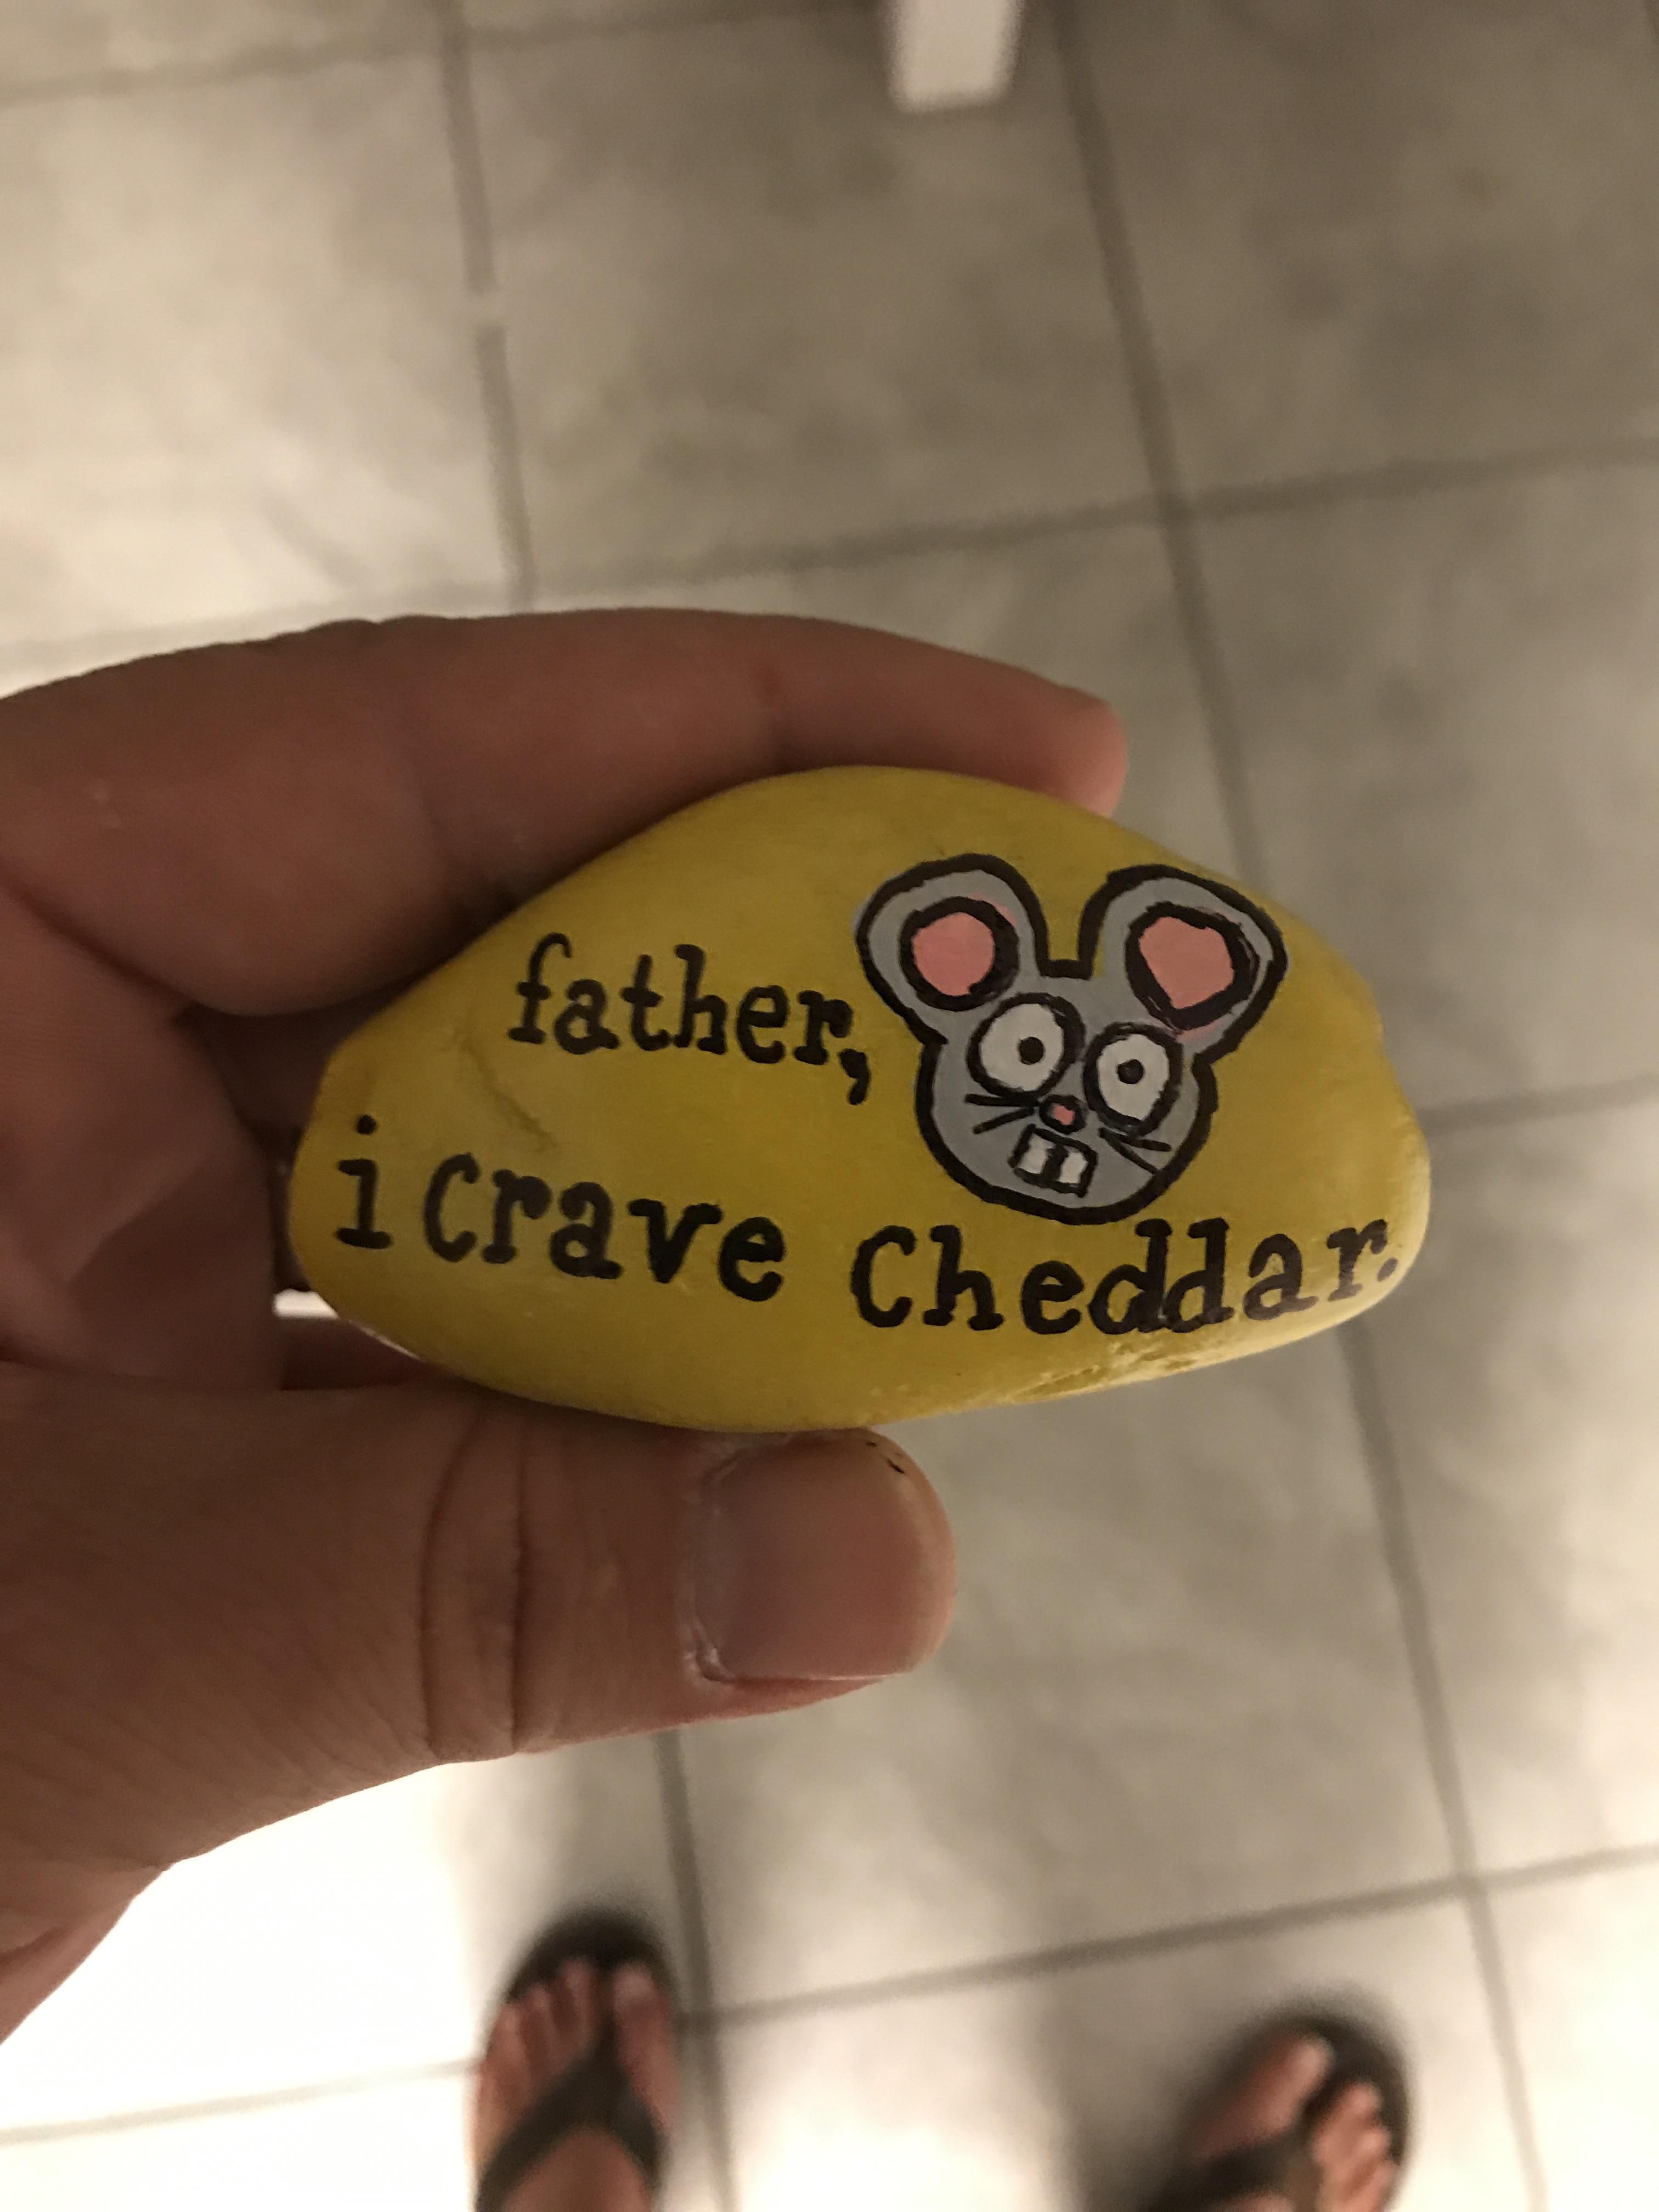 In the town that I live in, people paint rocks and hide them for others to find. My son found this one yesterday.